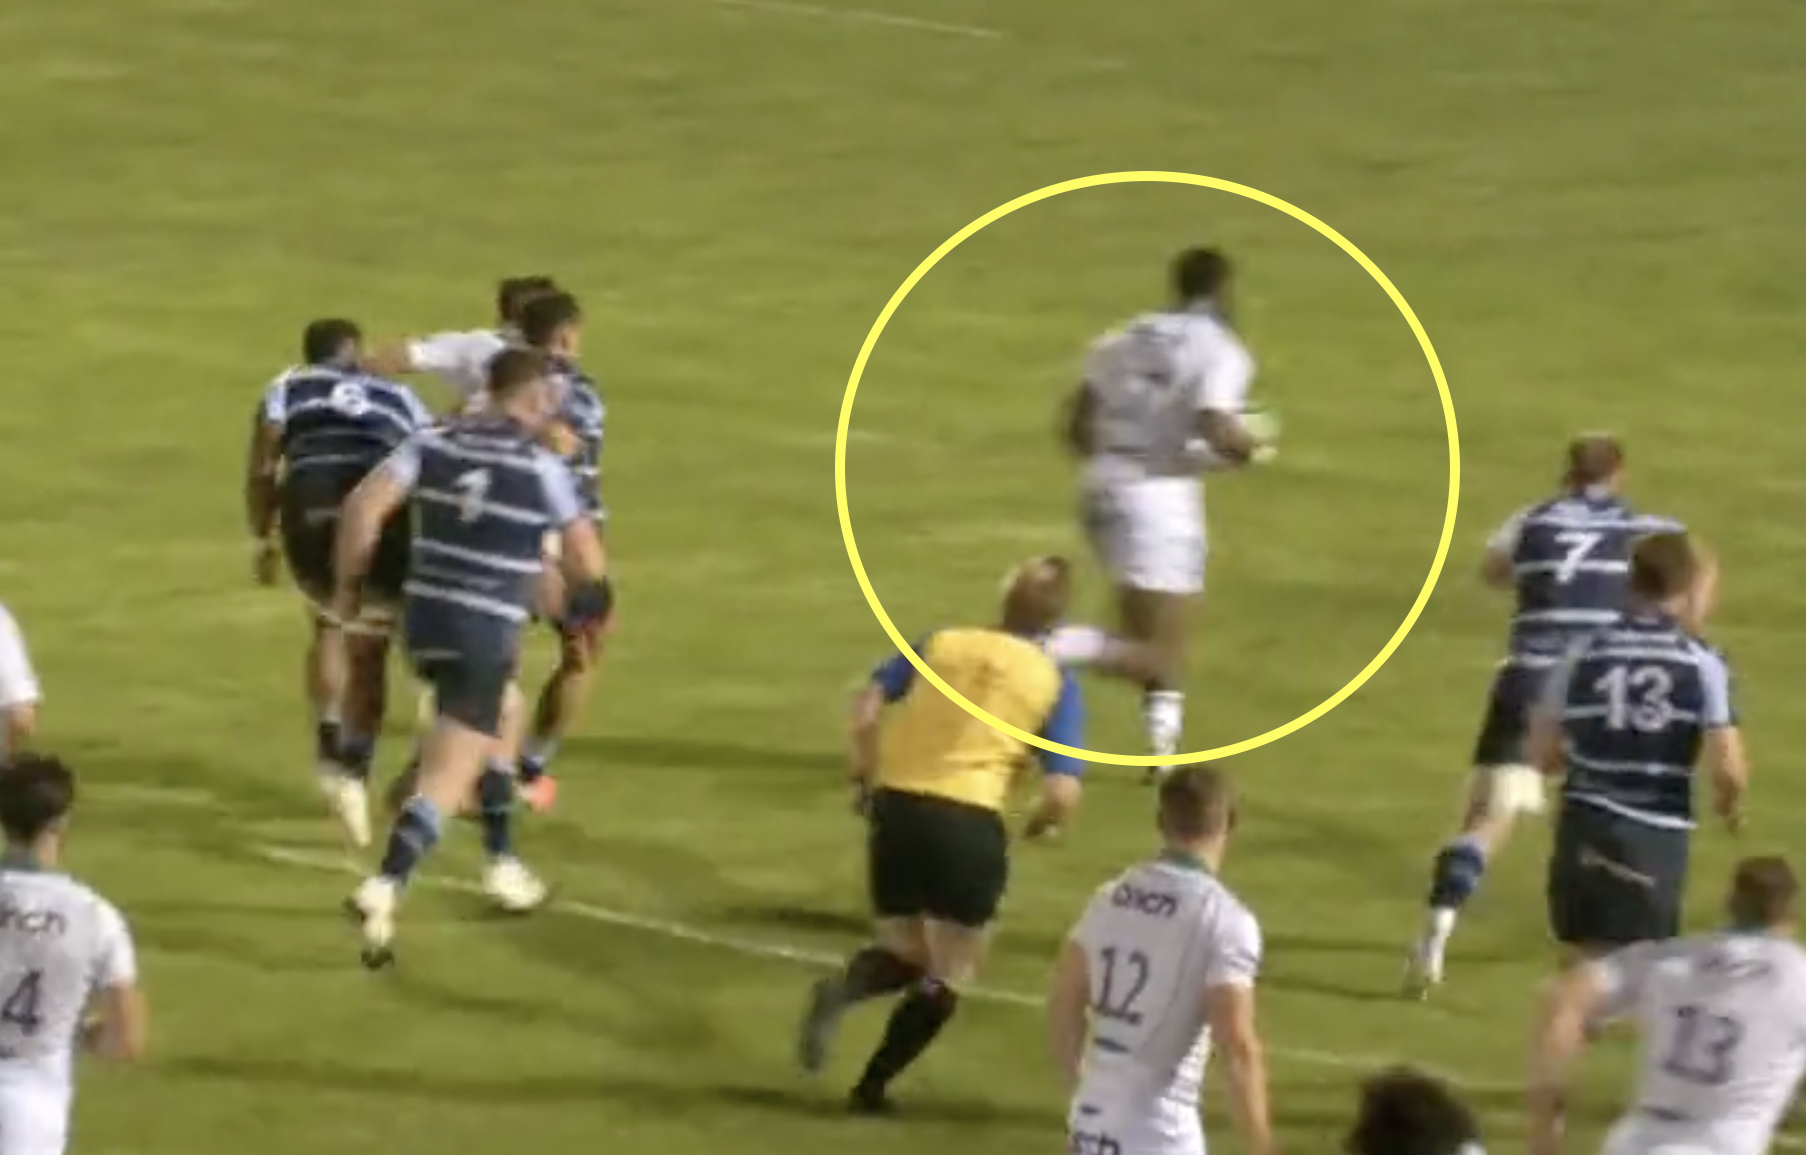 Saints prop deserved a new contract for this outrageous sidestep alone